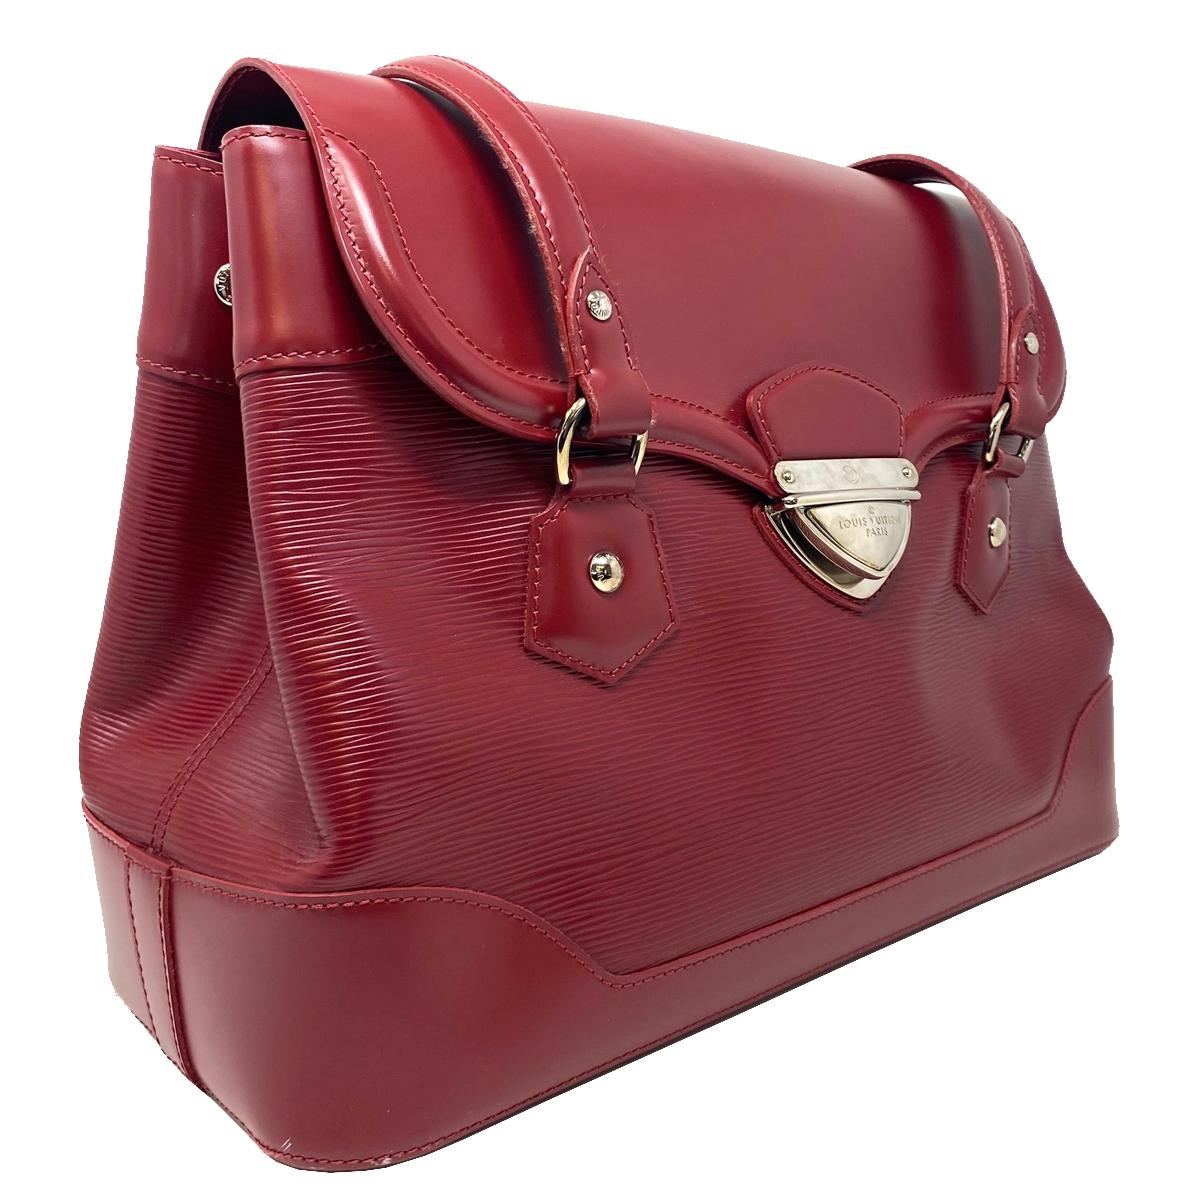 Company-Louis Vuitton
Style-Bagatelle GM Red Epi Leather Shoulder Bag 
Outside -No rips, tears or stains
Inside-No Rips , tears or stains  
Pockets-Interior pockets only 
Handles/ Straps-9 Drop
Measurements -15 L x 6 